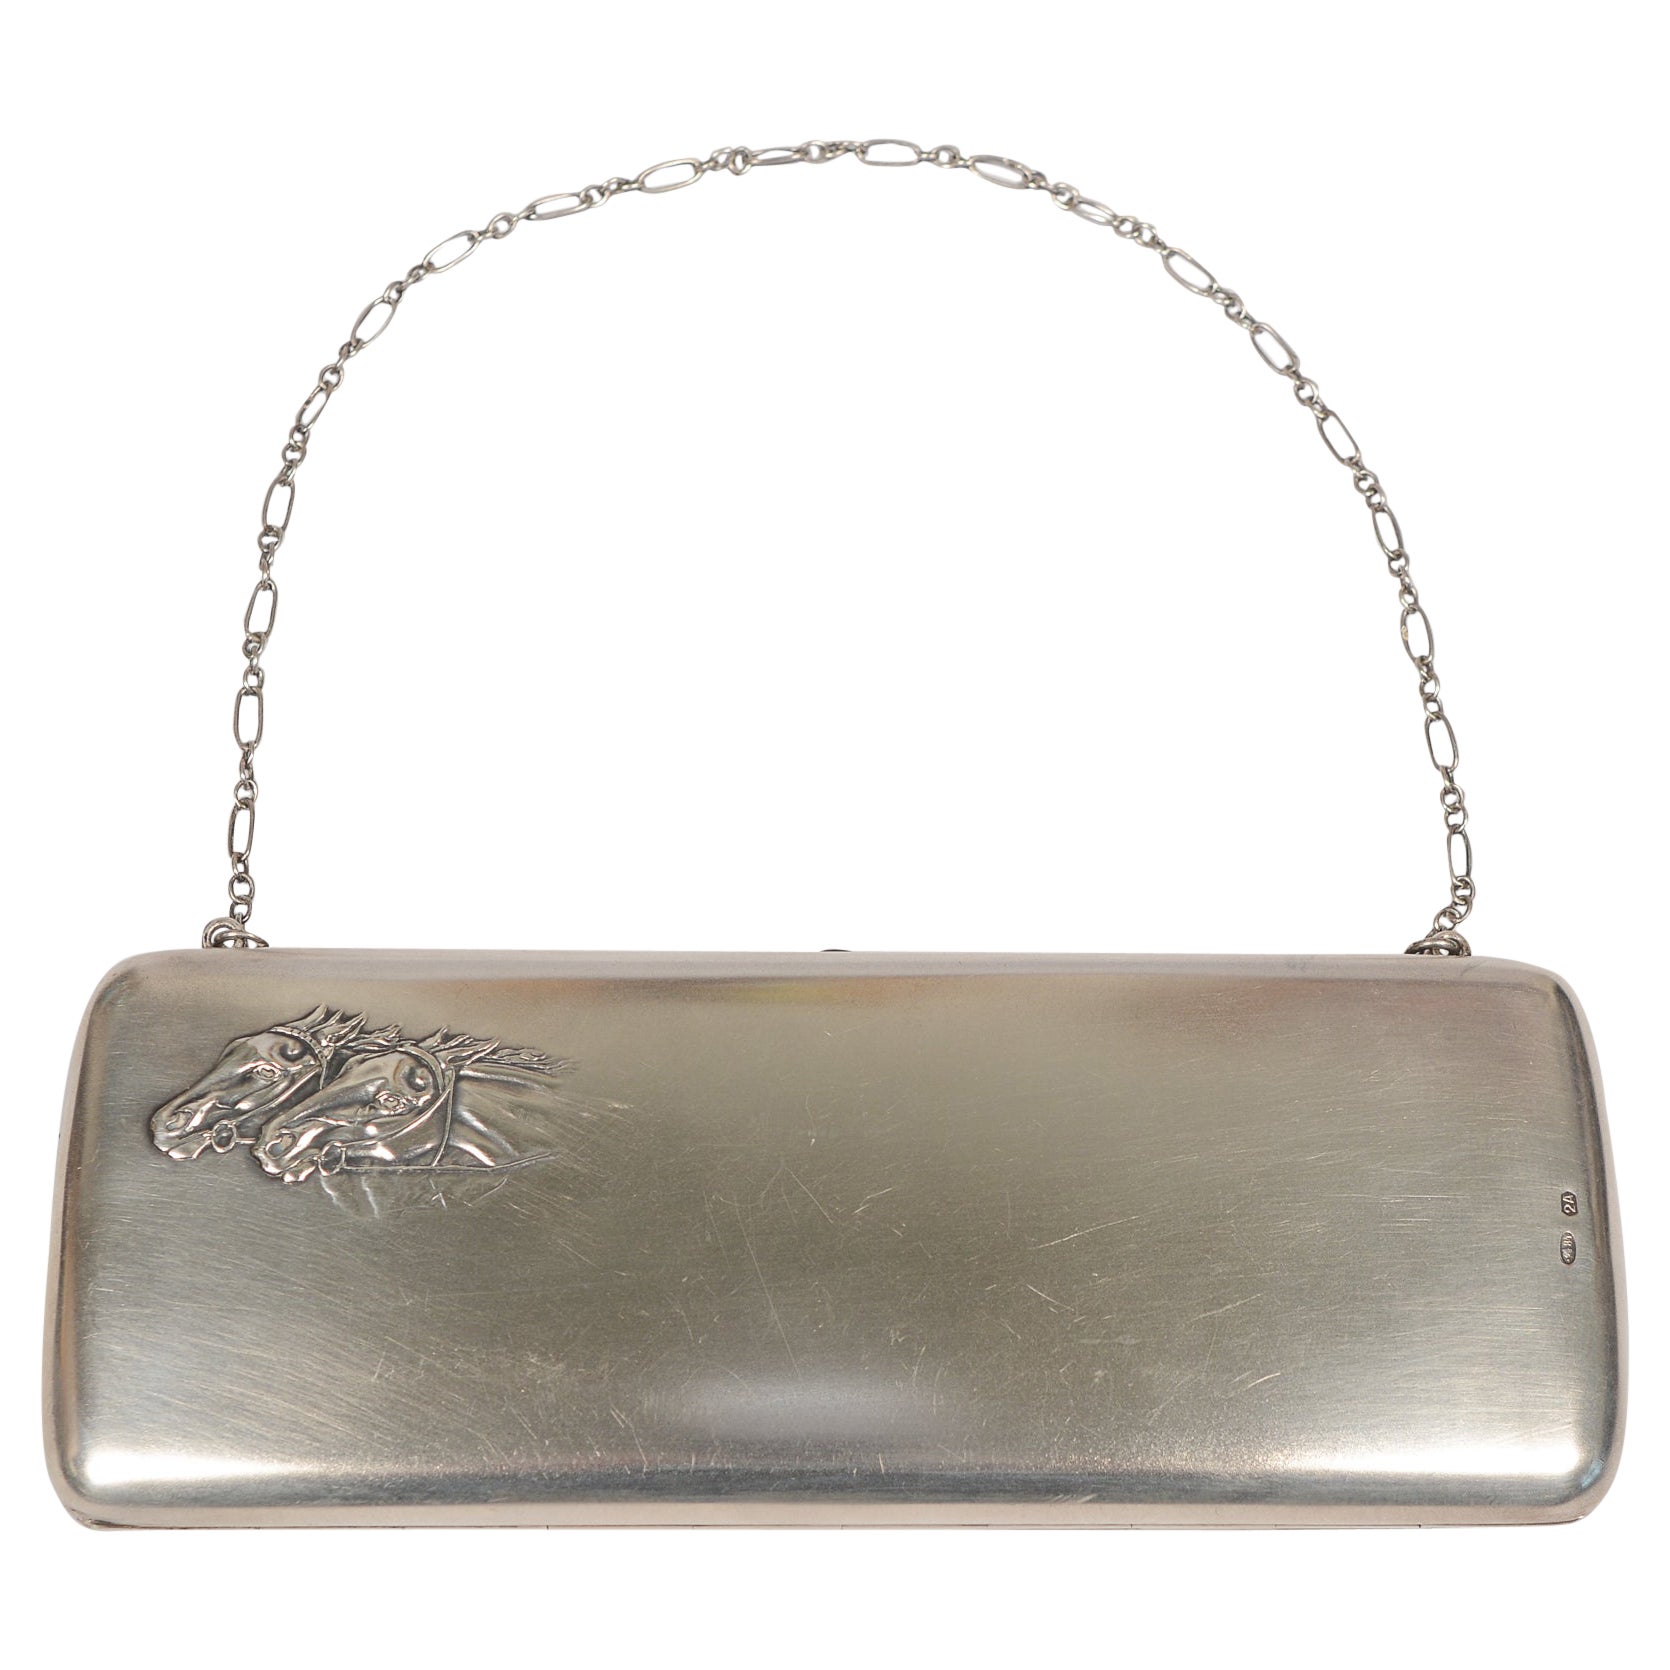 Early 20th Century Russian Silver 84 Clutch Purse with Horses Moscow